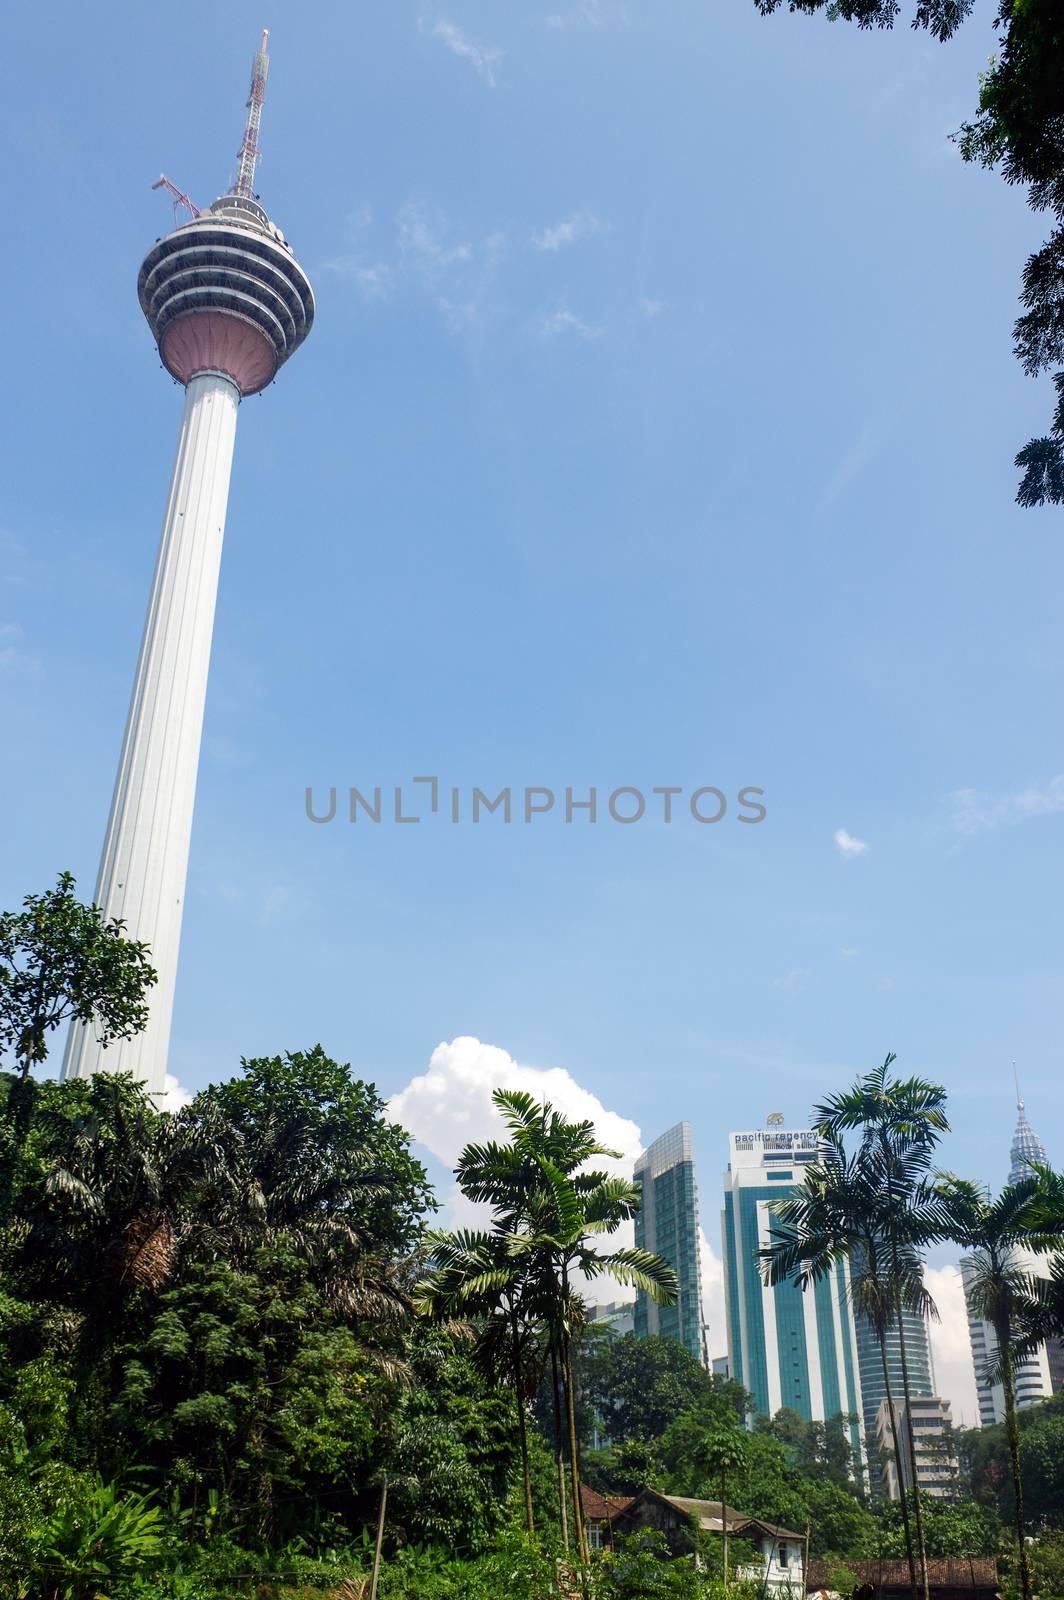 Kuala Lumpur, Malaysia - January 16, 2016: a view of the KL Tower commucation tower between palms and plant